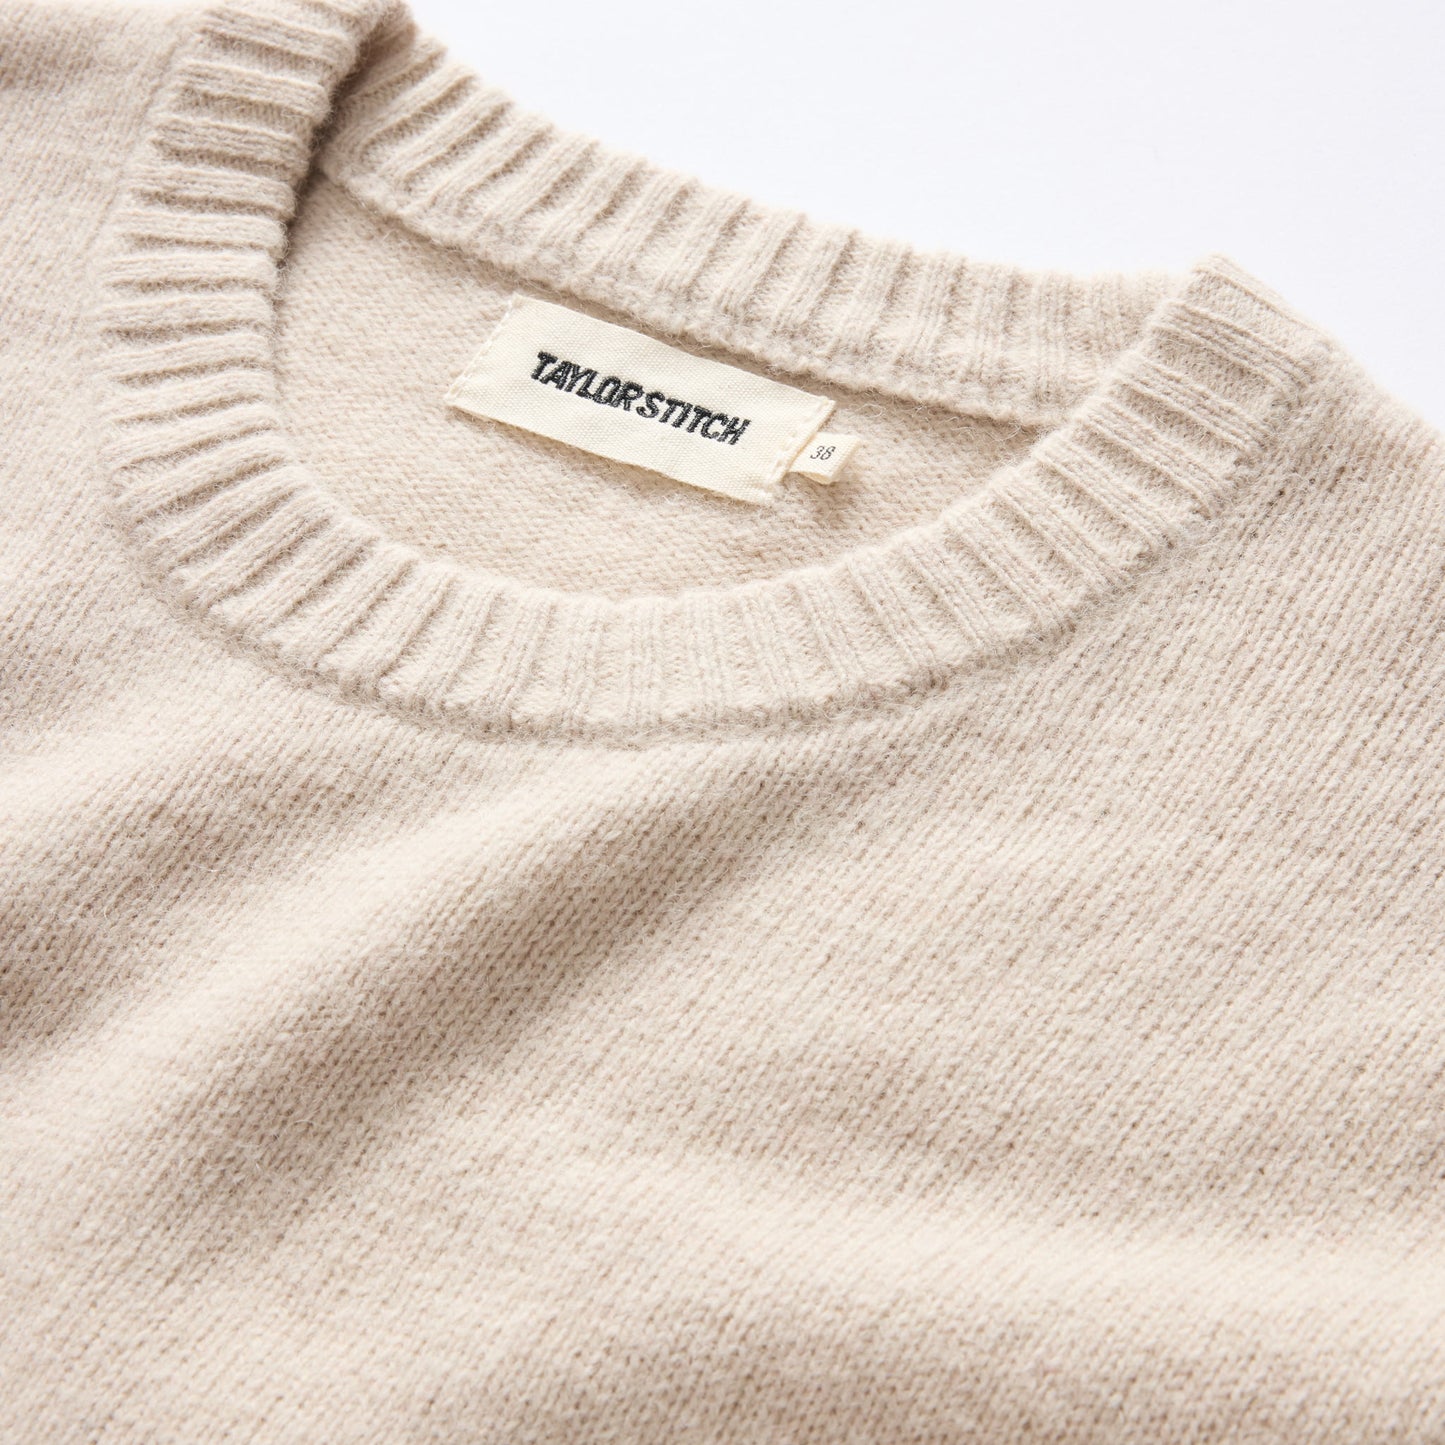 Taylor Stitch - The Lodge Sweater in Oat